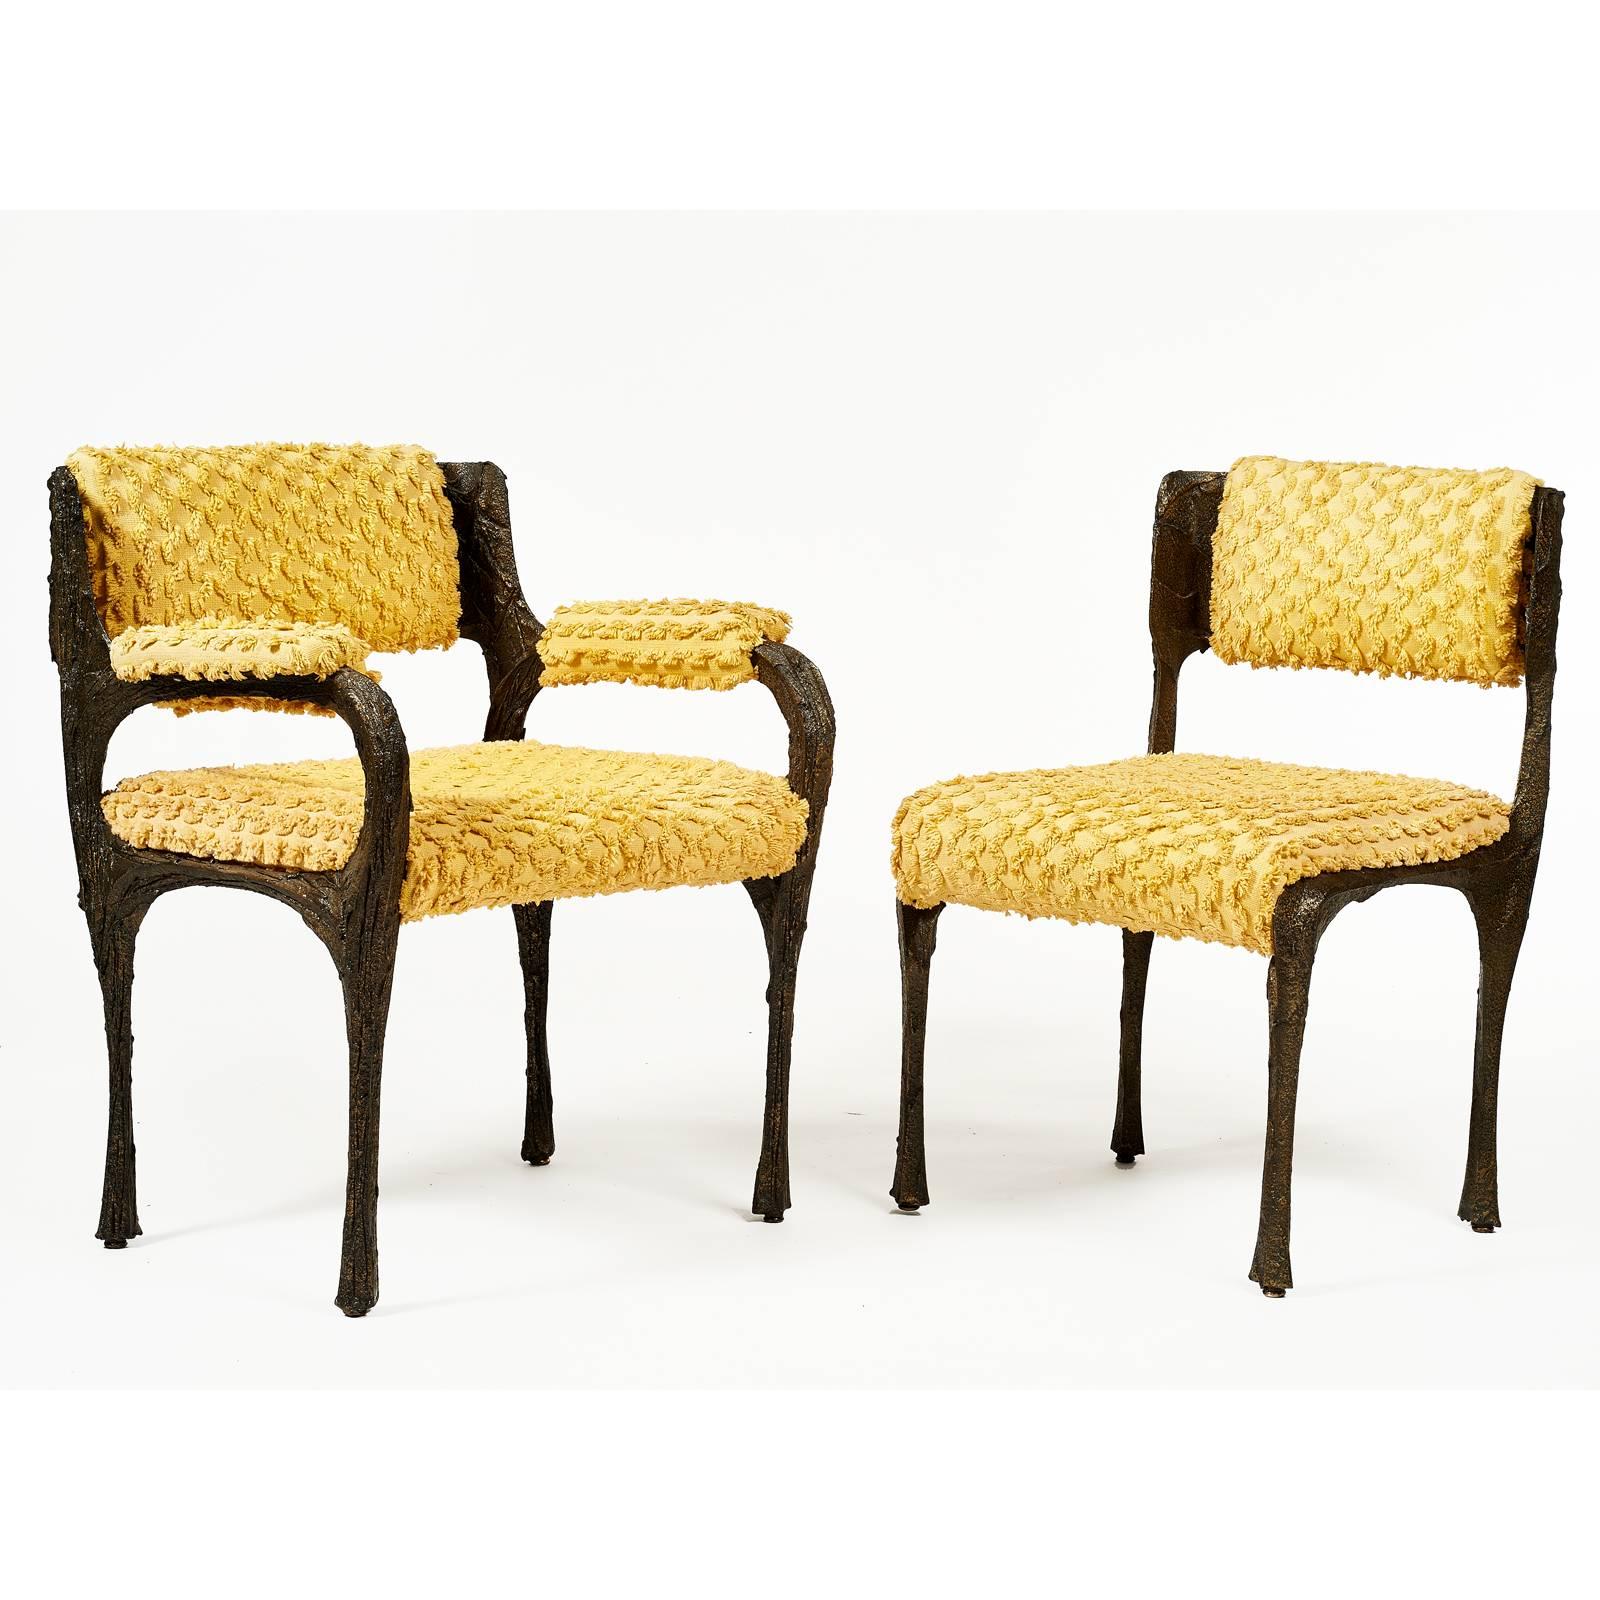 You are truly viewing the most outstanding example and museum quality of  two PE 106 arm chairs and six PE 105 chairs in existence. They were remarkably cared for since 1974, 42 years. Purchased originally in 1974 from the Chicago Design Show with